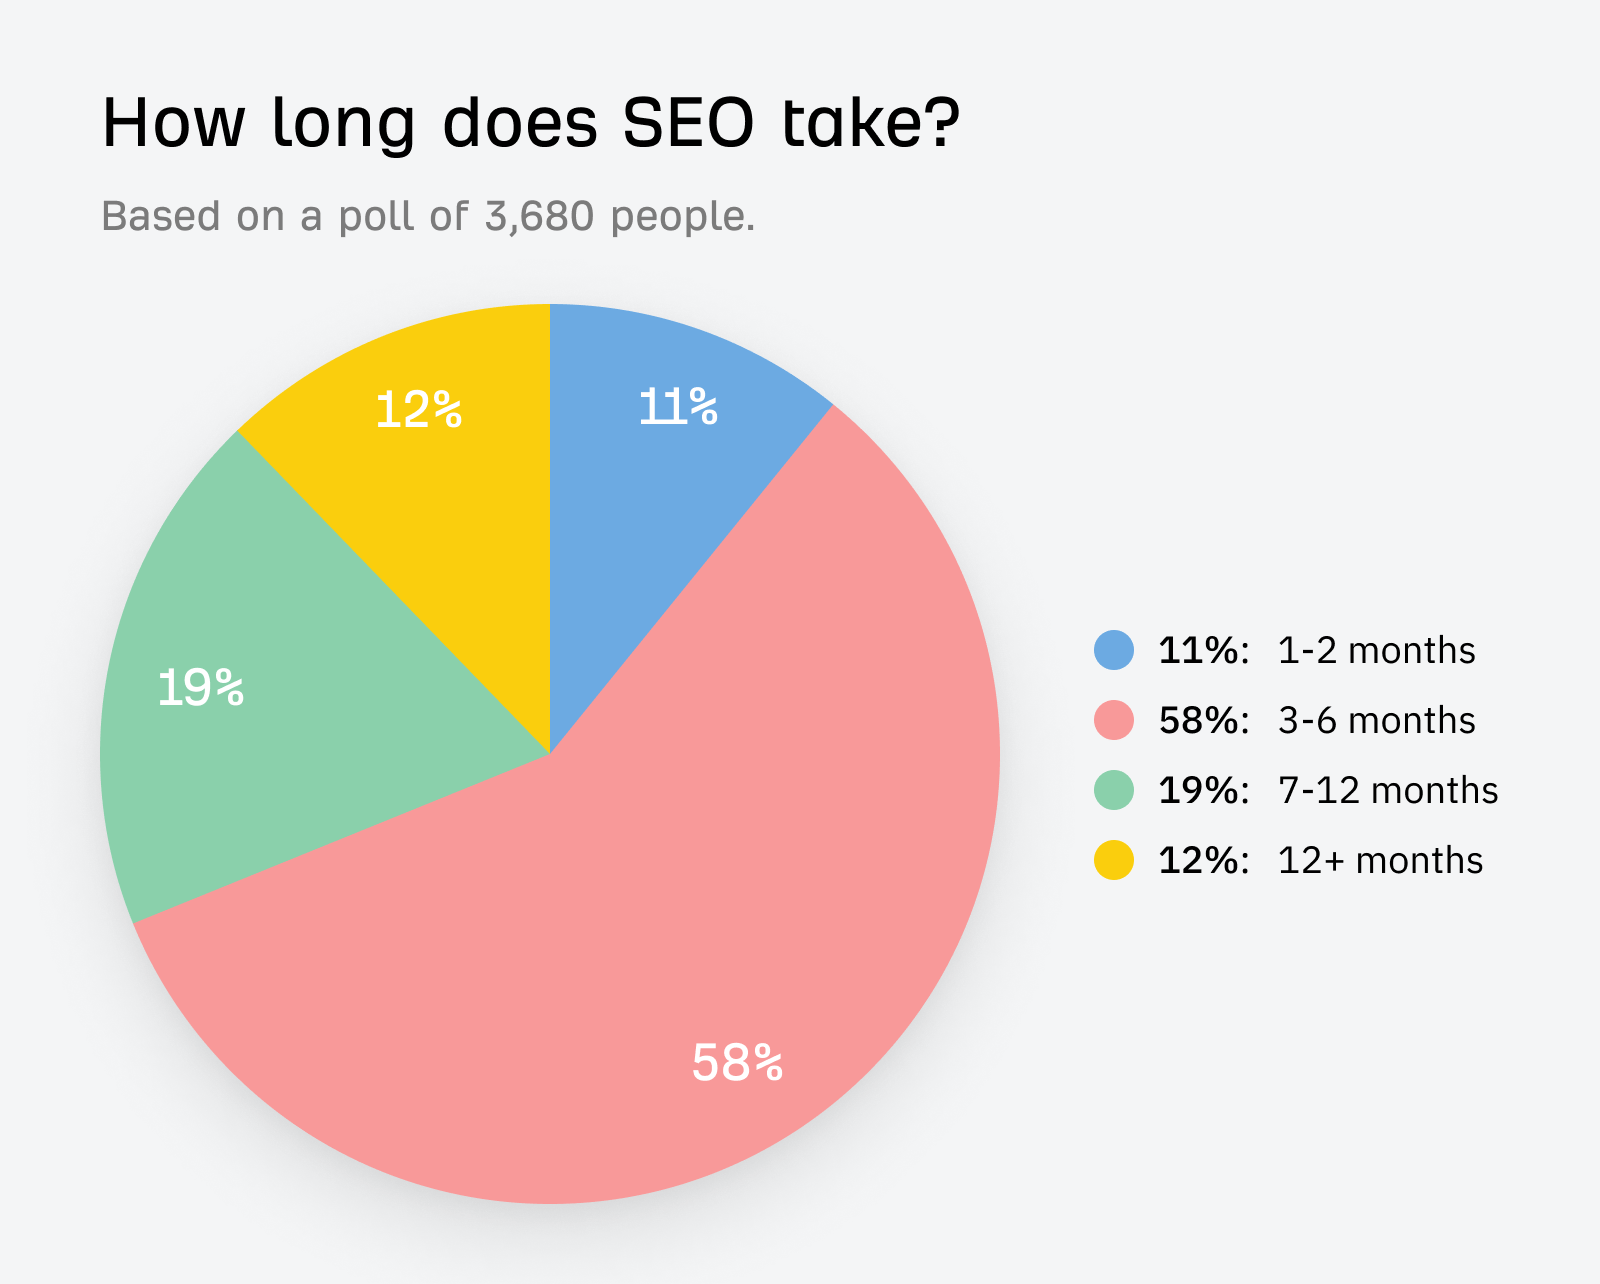 Pie chart showing how long SEO takes, according to a poll of 3,680 people